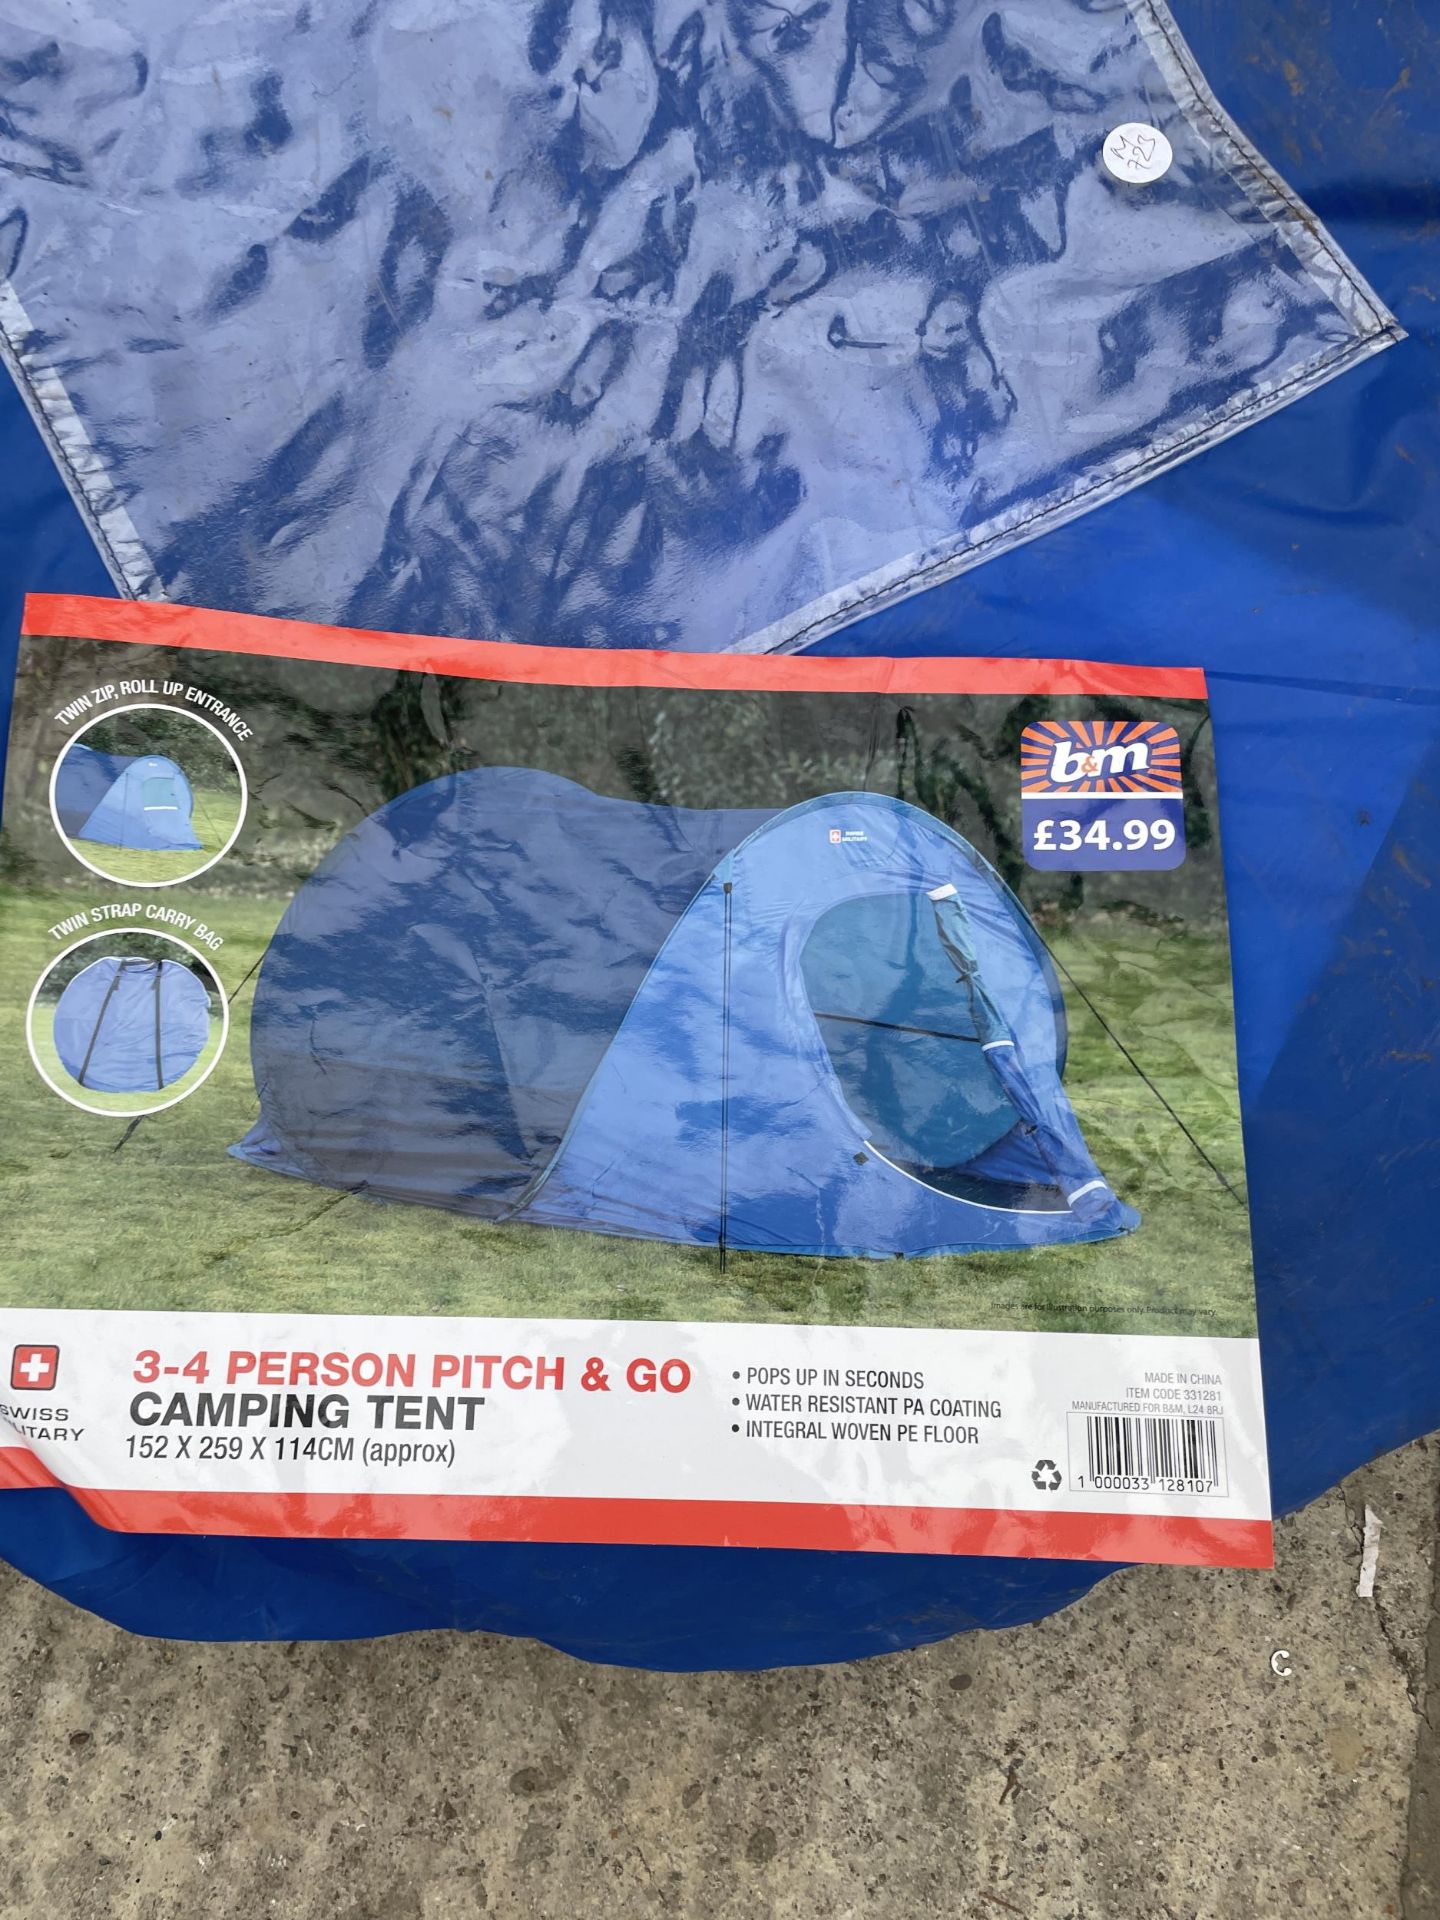 A 3-4 PERSON PITCH AND GO CAMPING TENT - Bild 2 aus 2